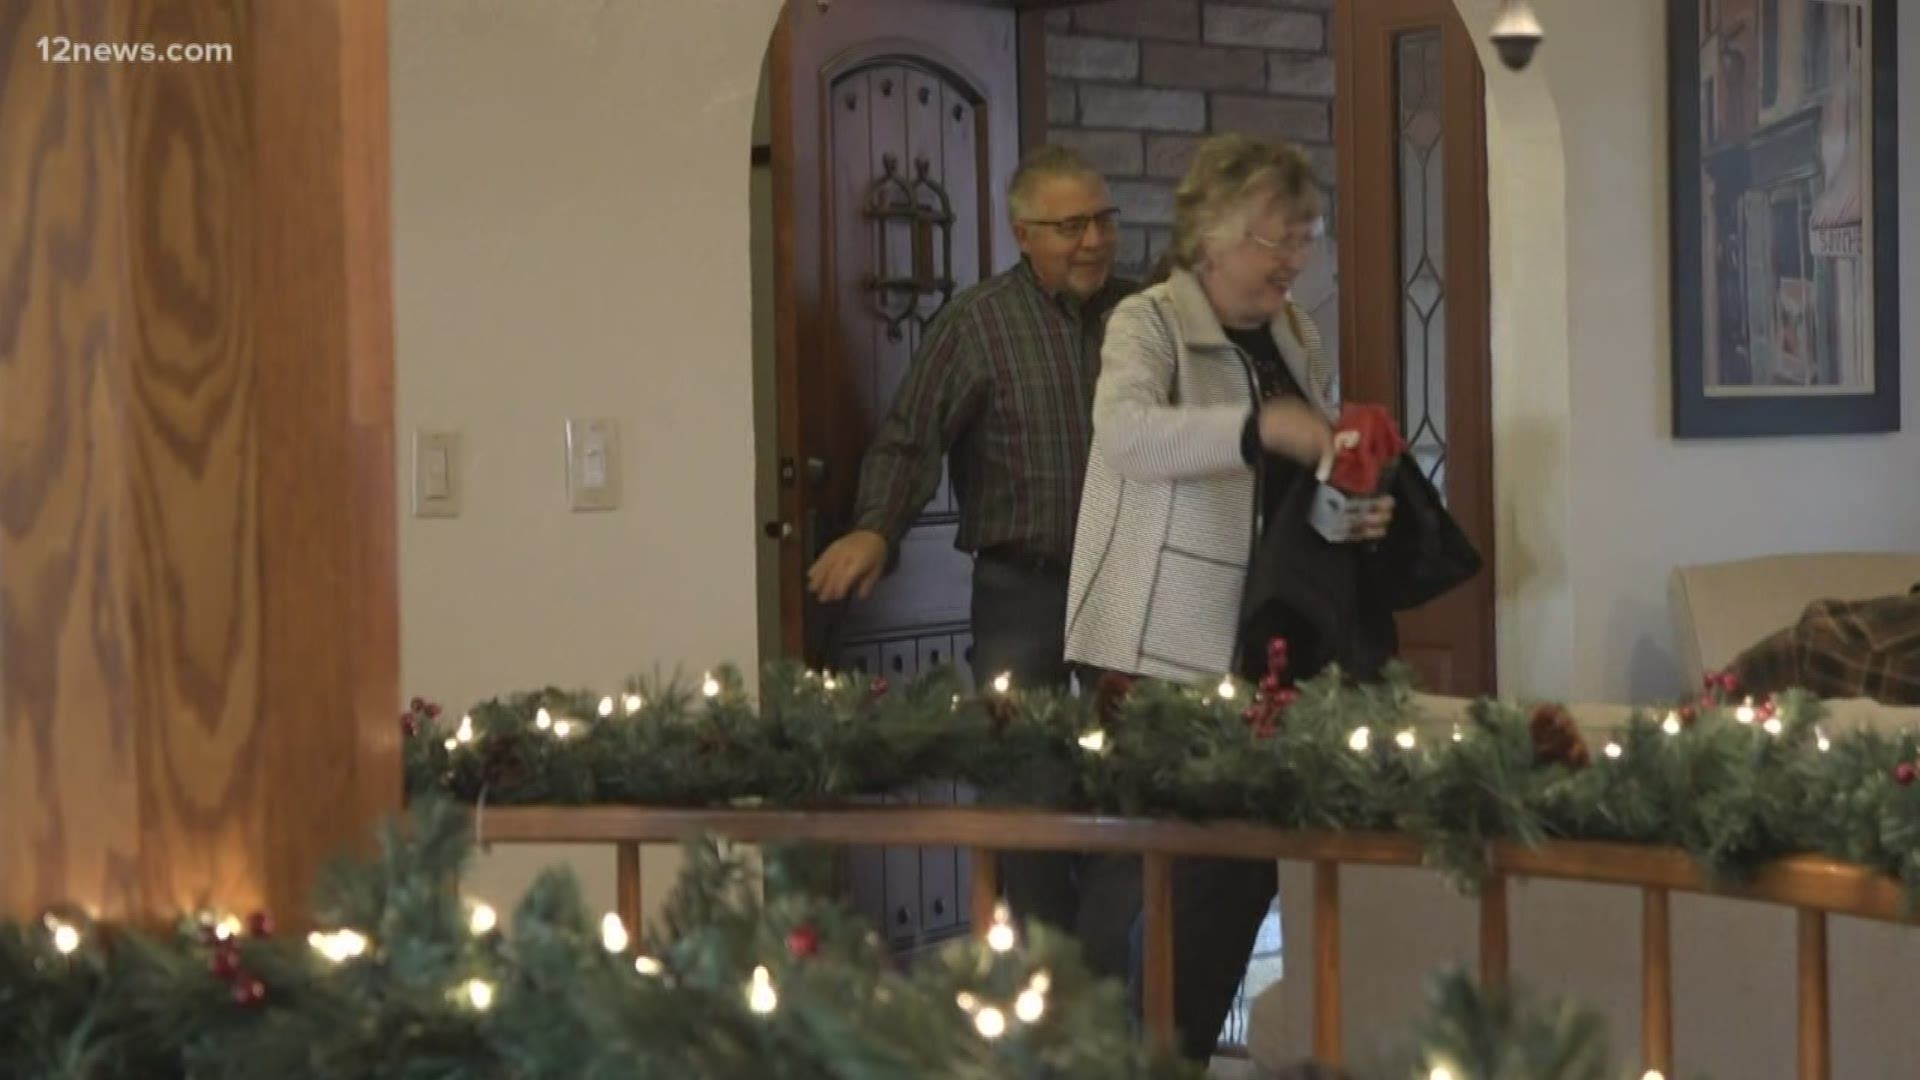 Charles and June Ford self-built a home on Lookout Mountain in 1985. Their grandchildren bought the home and had Christmas there. Team 12's Ryan Cody has the story.